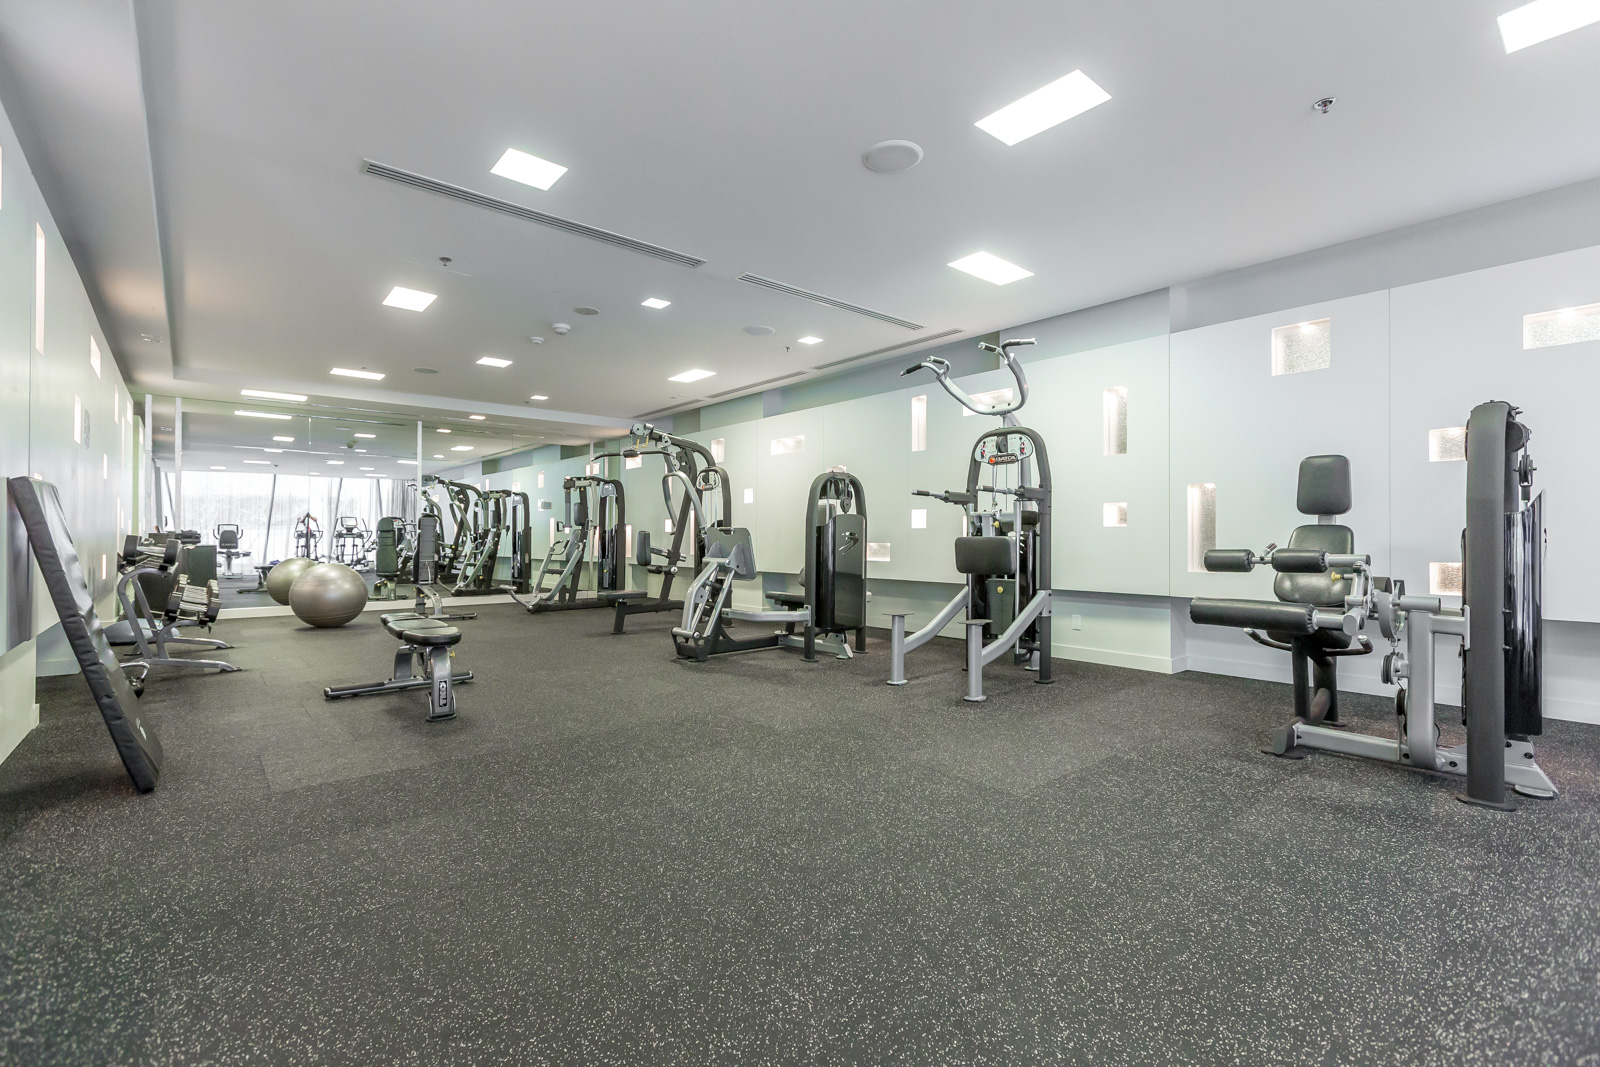 Photo of condo's fitness centre. Picture shows so many pieces of equipment. The space is rather large. 